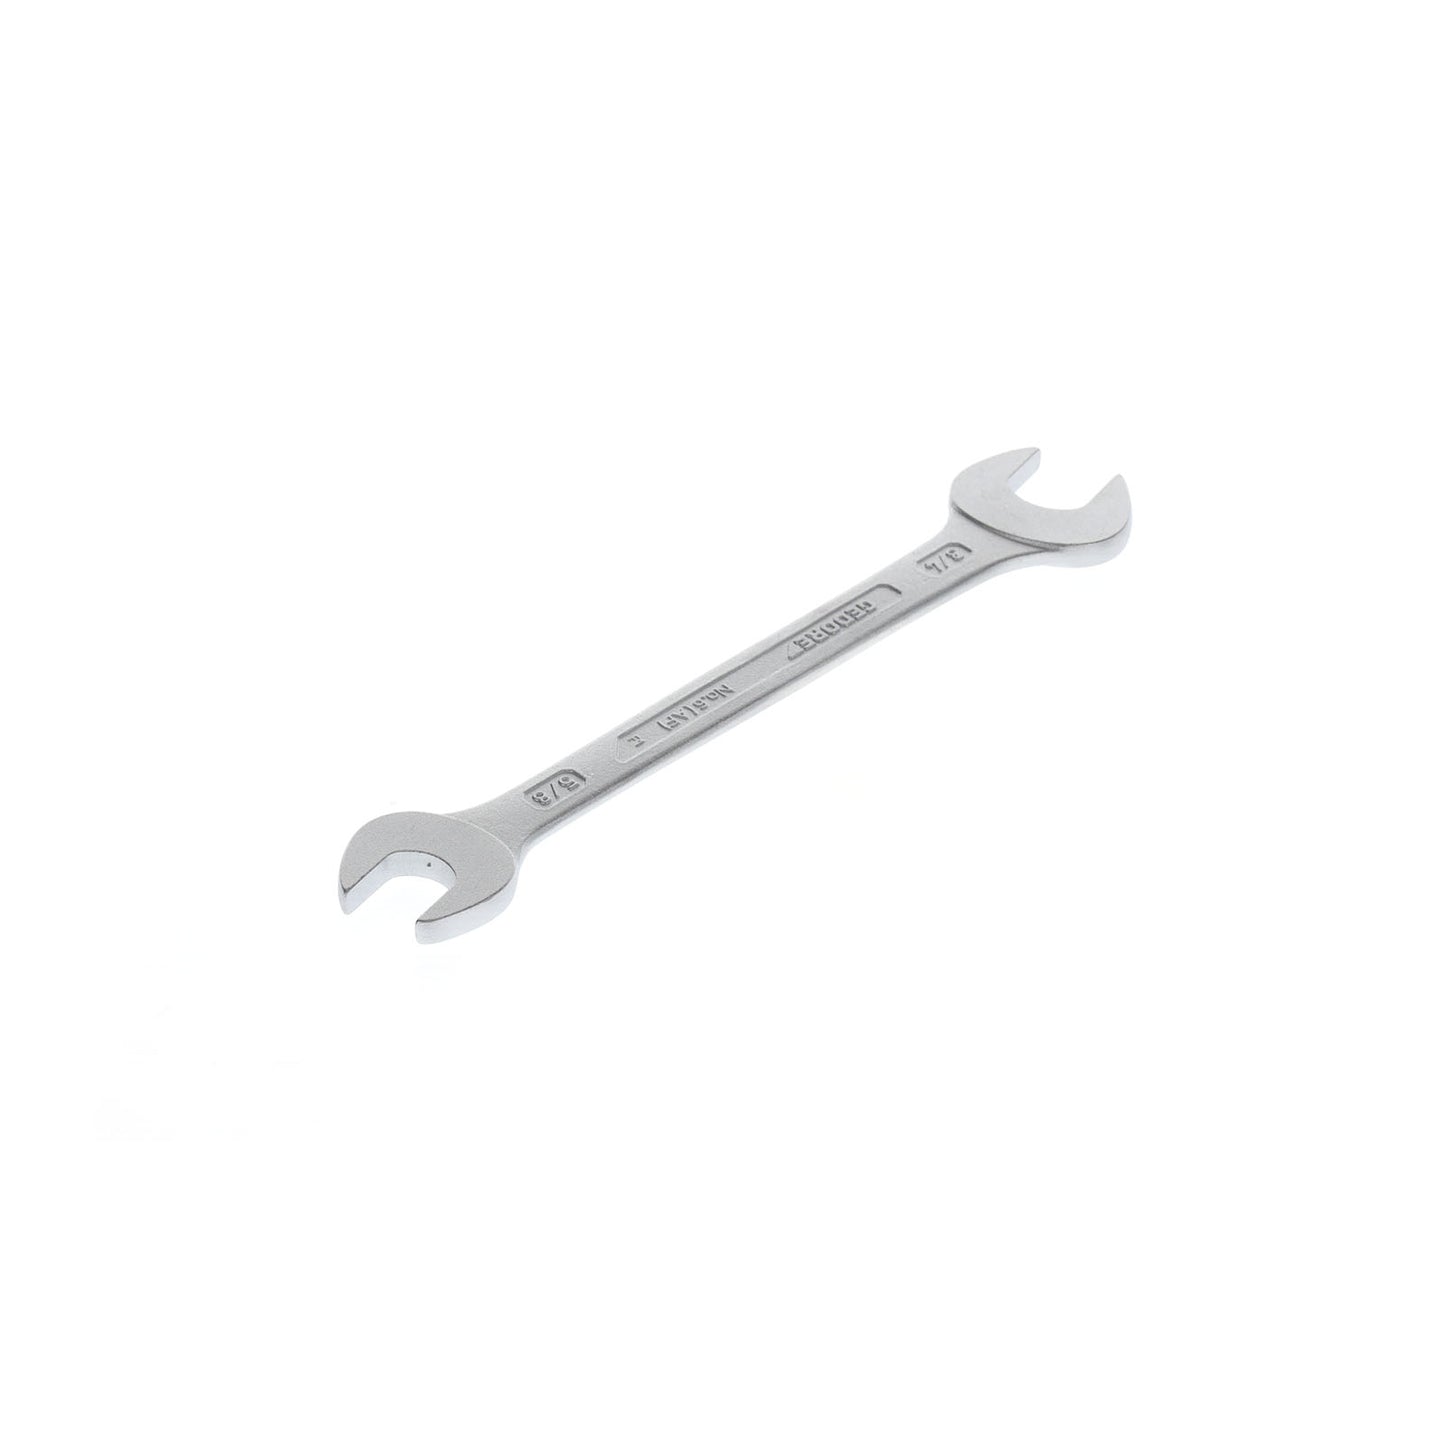 GEDORE 6 5/8X3/4AF - 2-Mount Fixed Wrench, 5/8x3/4AF (6070960)